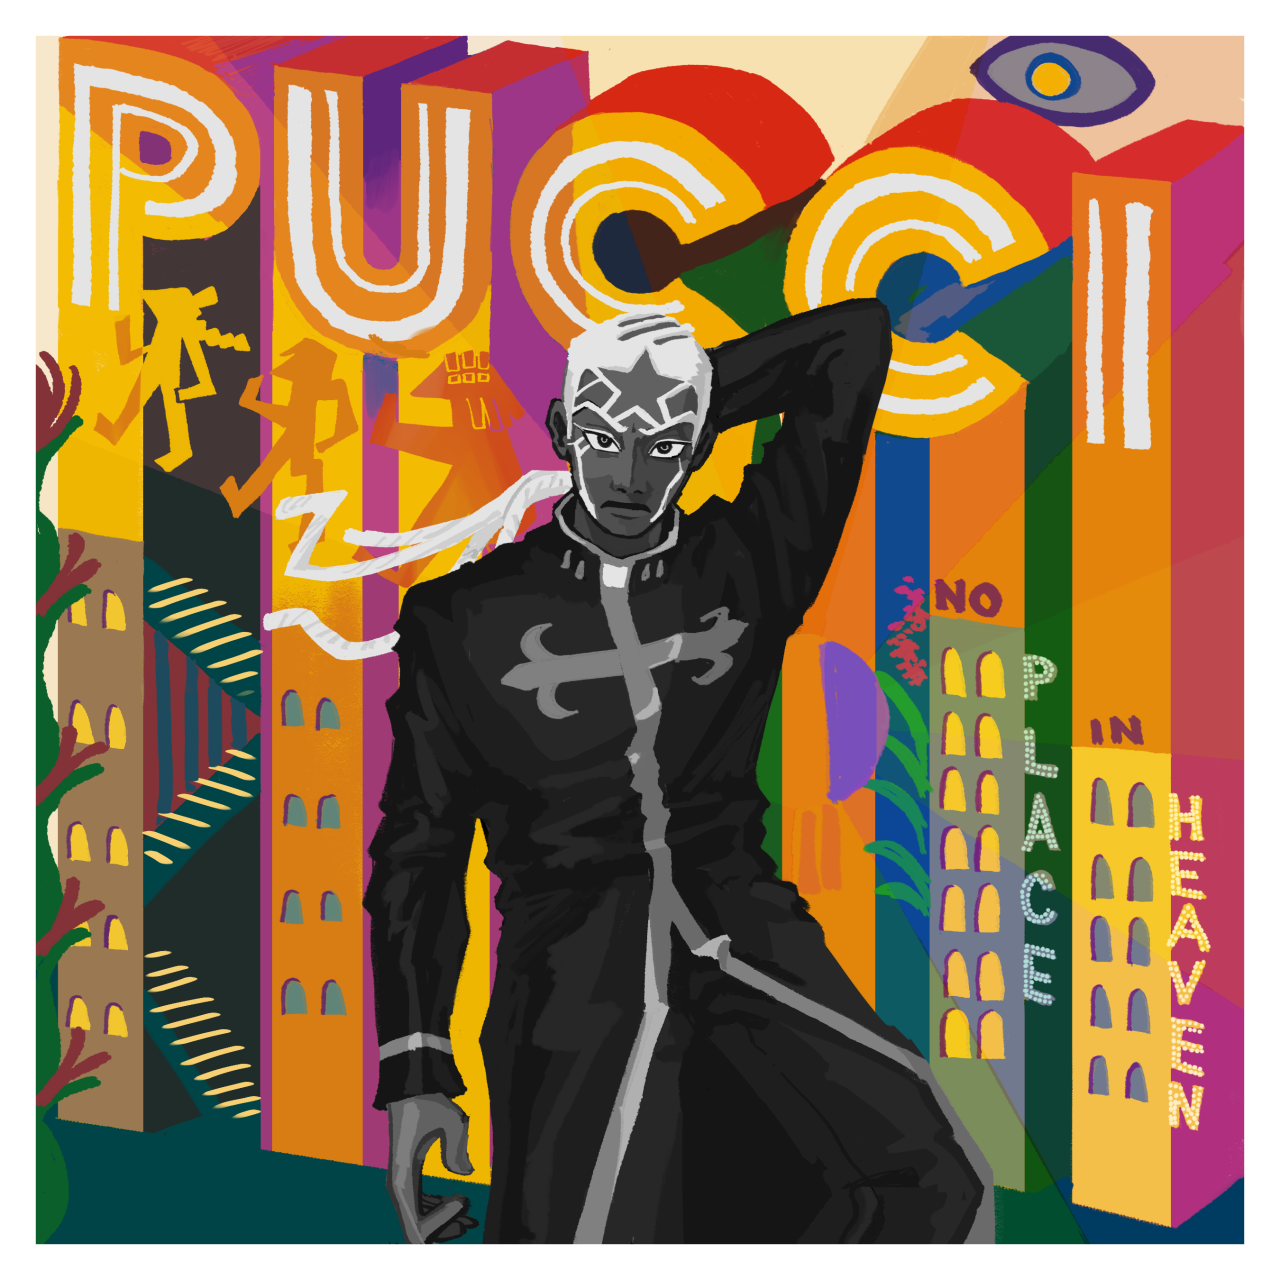 happy-jojo-part-6-here-s-my-entry-for-ntwicb-zine-2-enrico-pucci